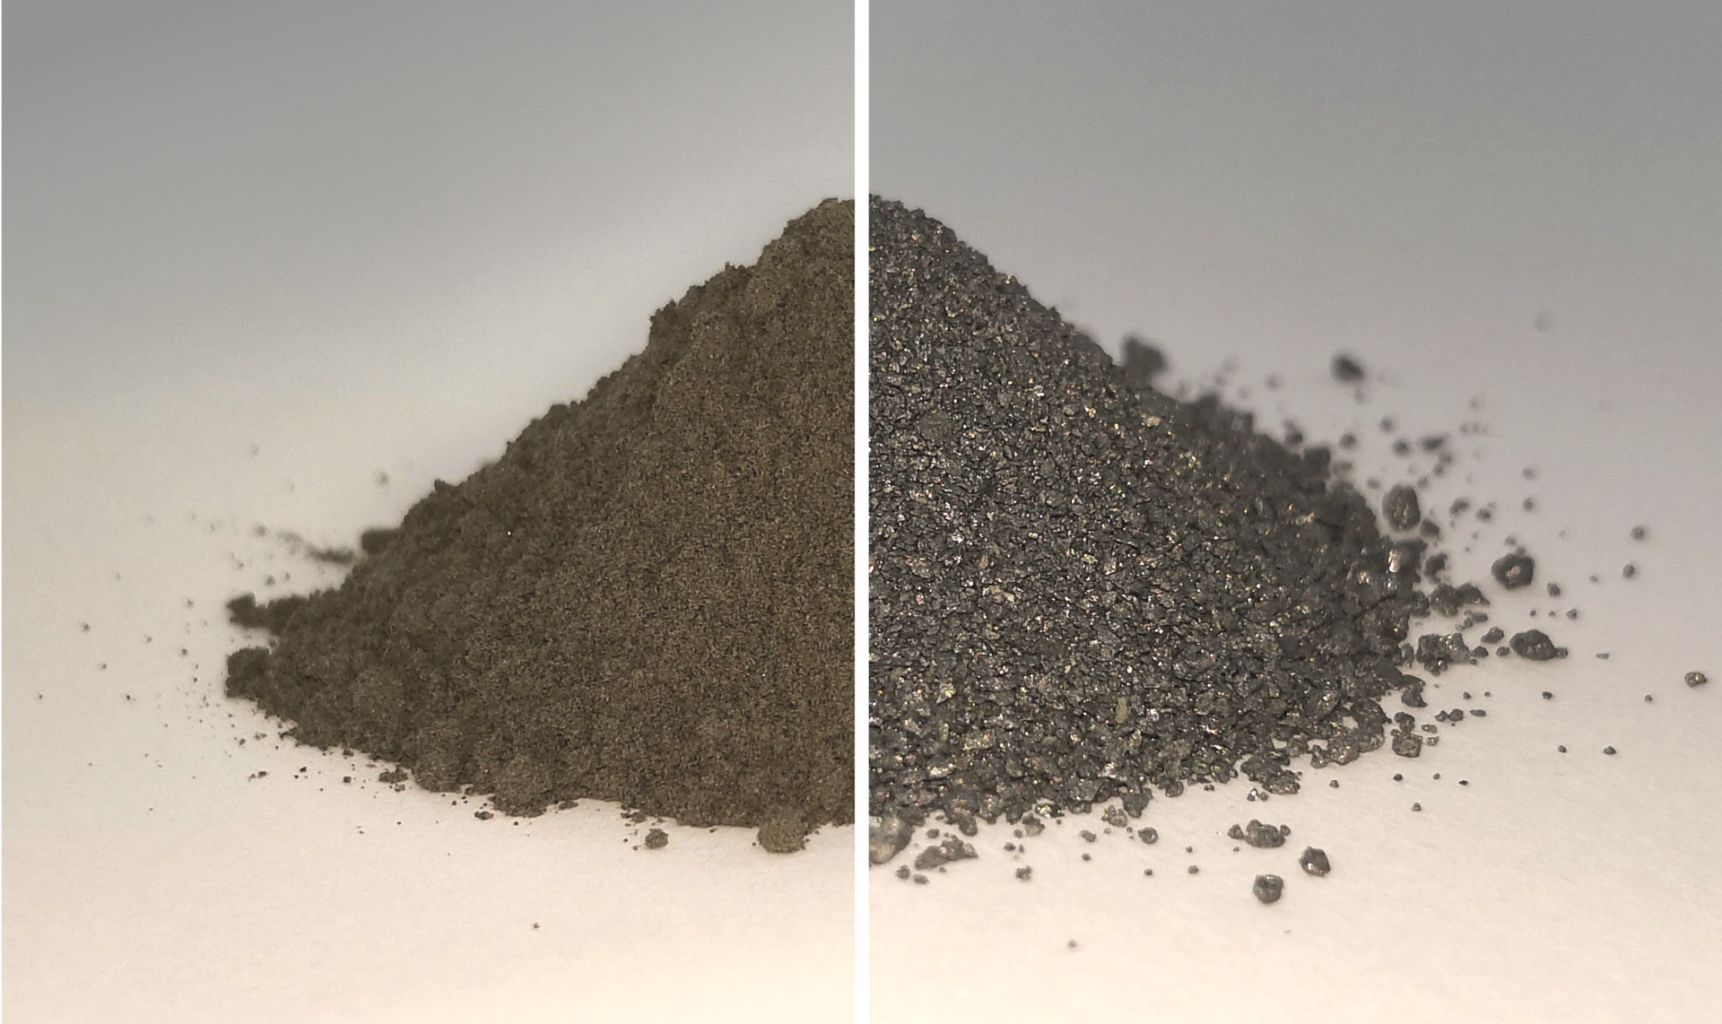 A simulated lunar regolith before (left) and after (right) oxygen extraction. Credit: Beth Lomax / University of Glasgow